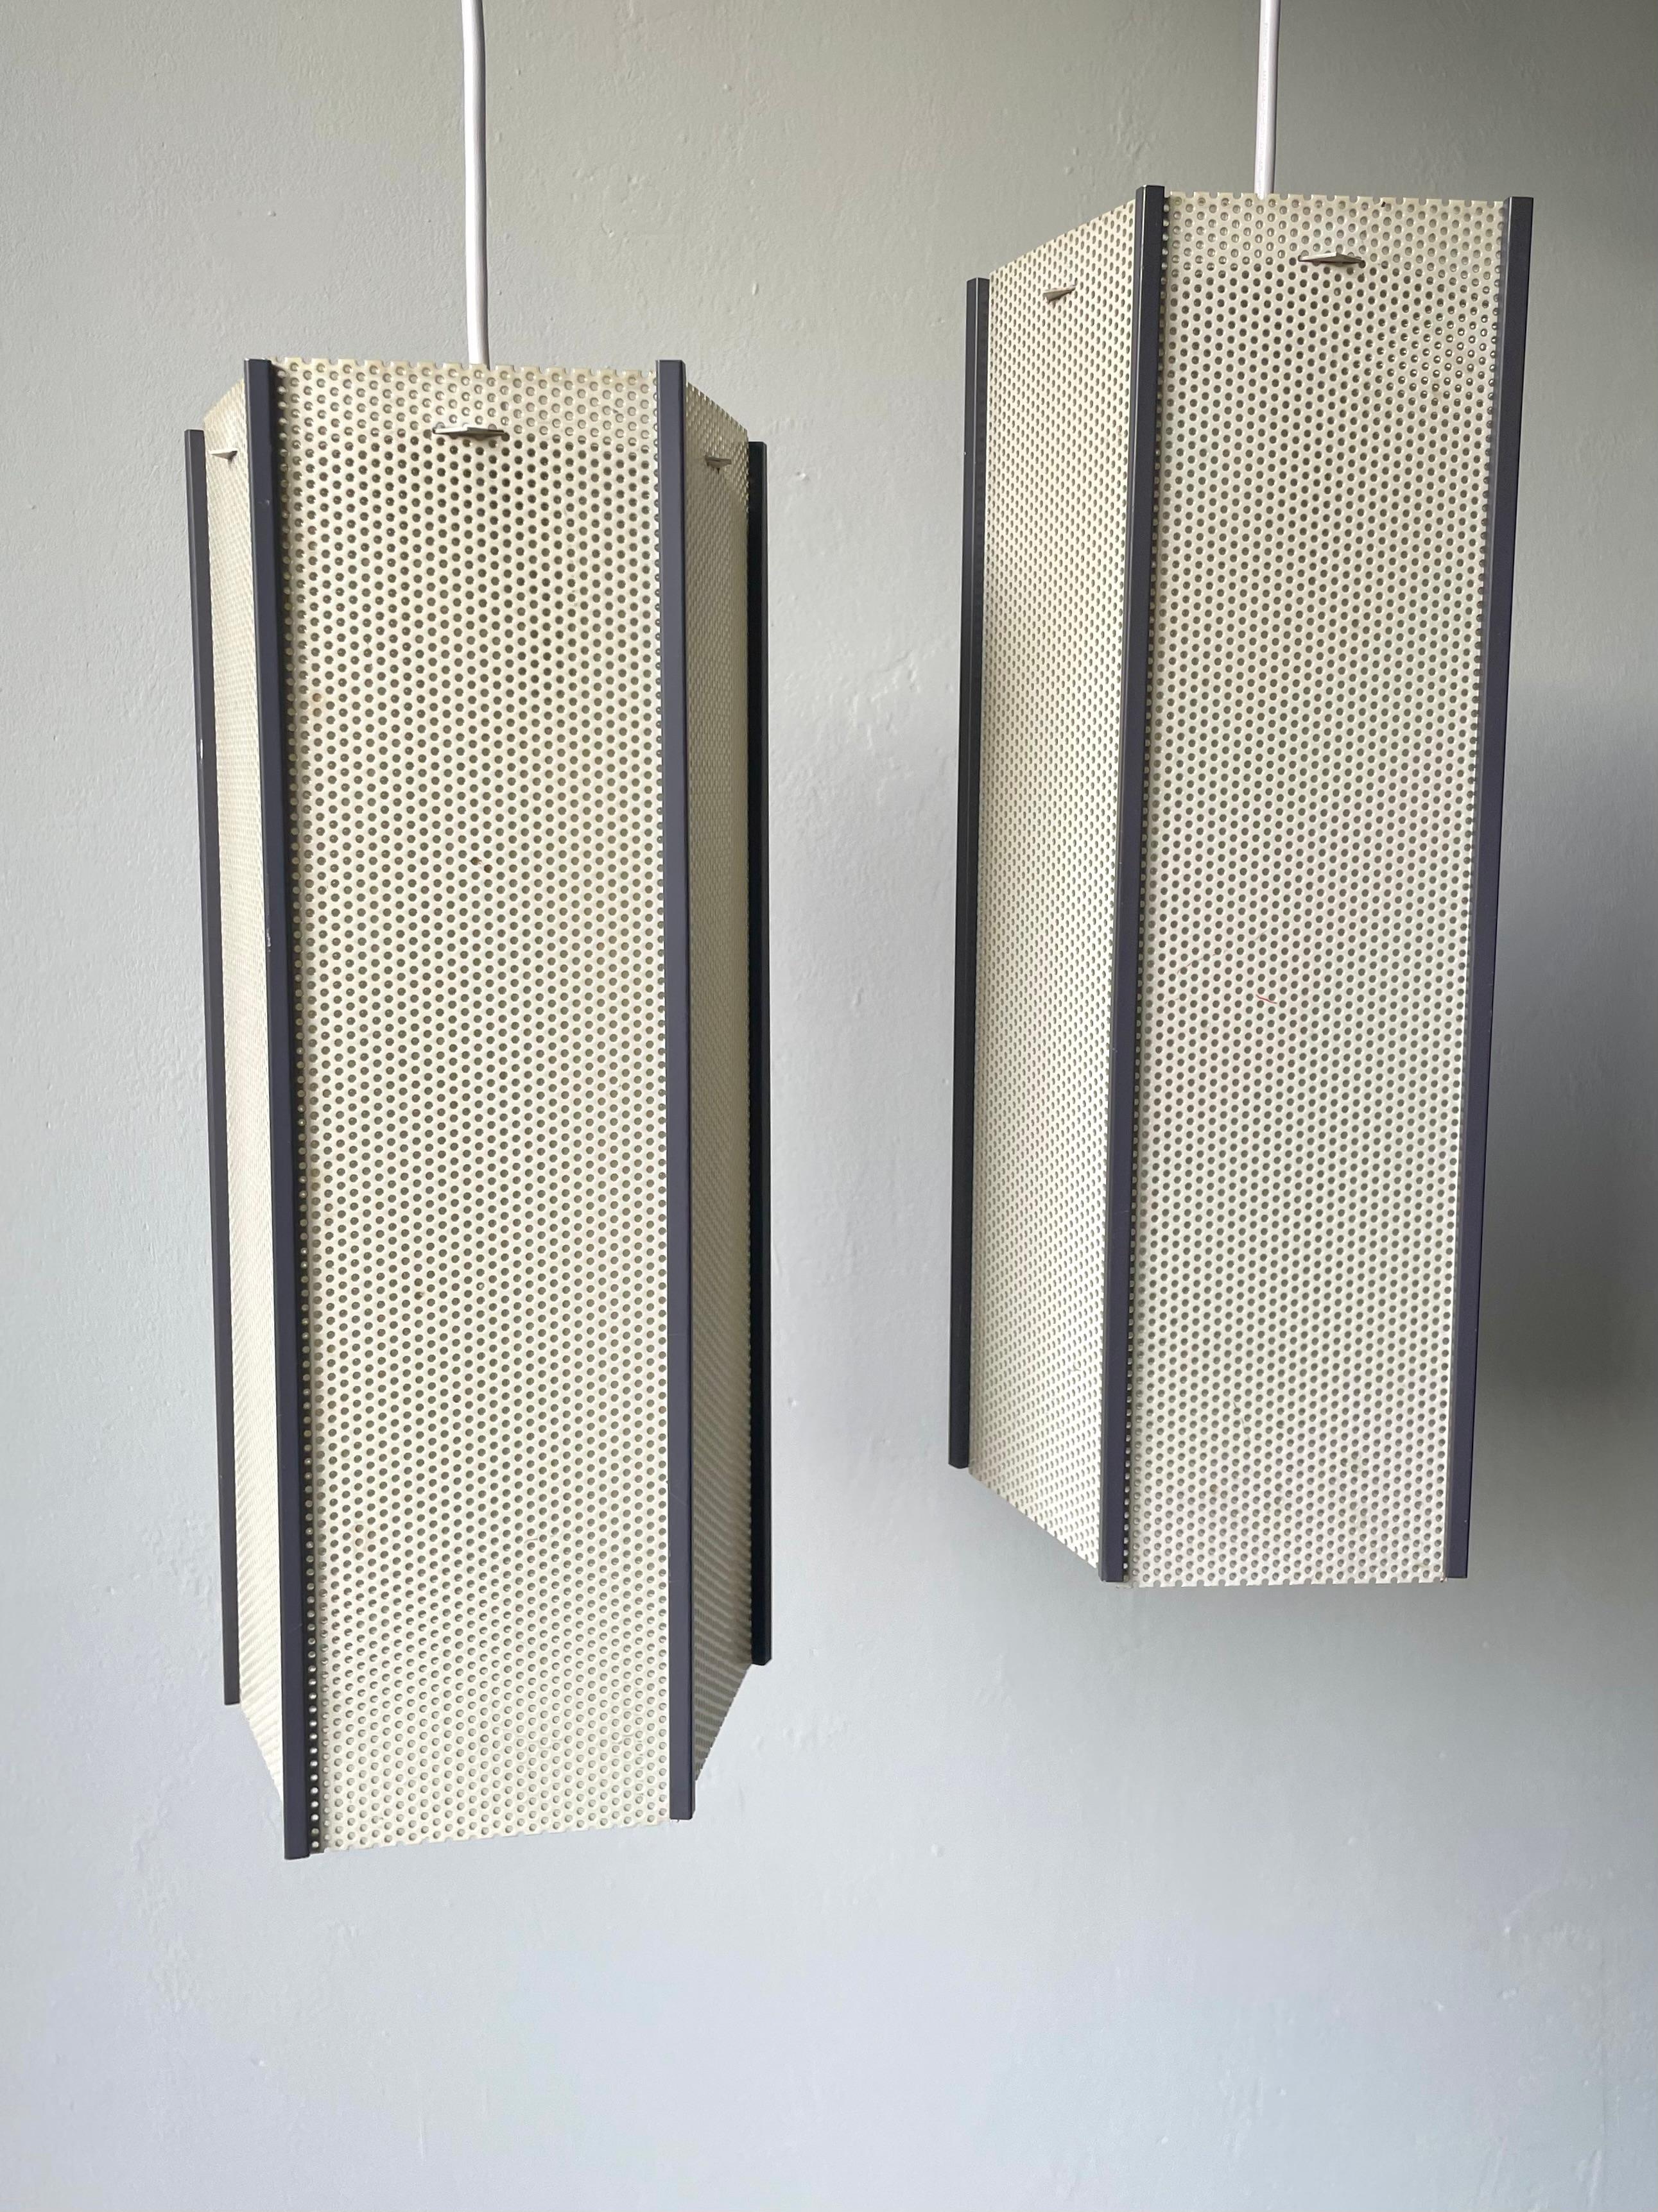 Set of two angular perforated metal pendants attributed to French-Hungarian designer Mathieu Matégot (1910-2001) in the 1950s. Five rectangular cream yellow metal sheets with a slight greenish tint creating a tall pentagon shape with slender gray